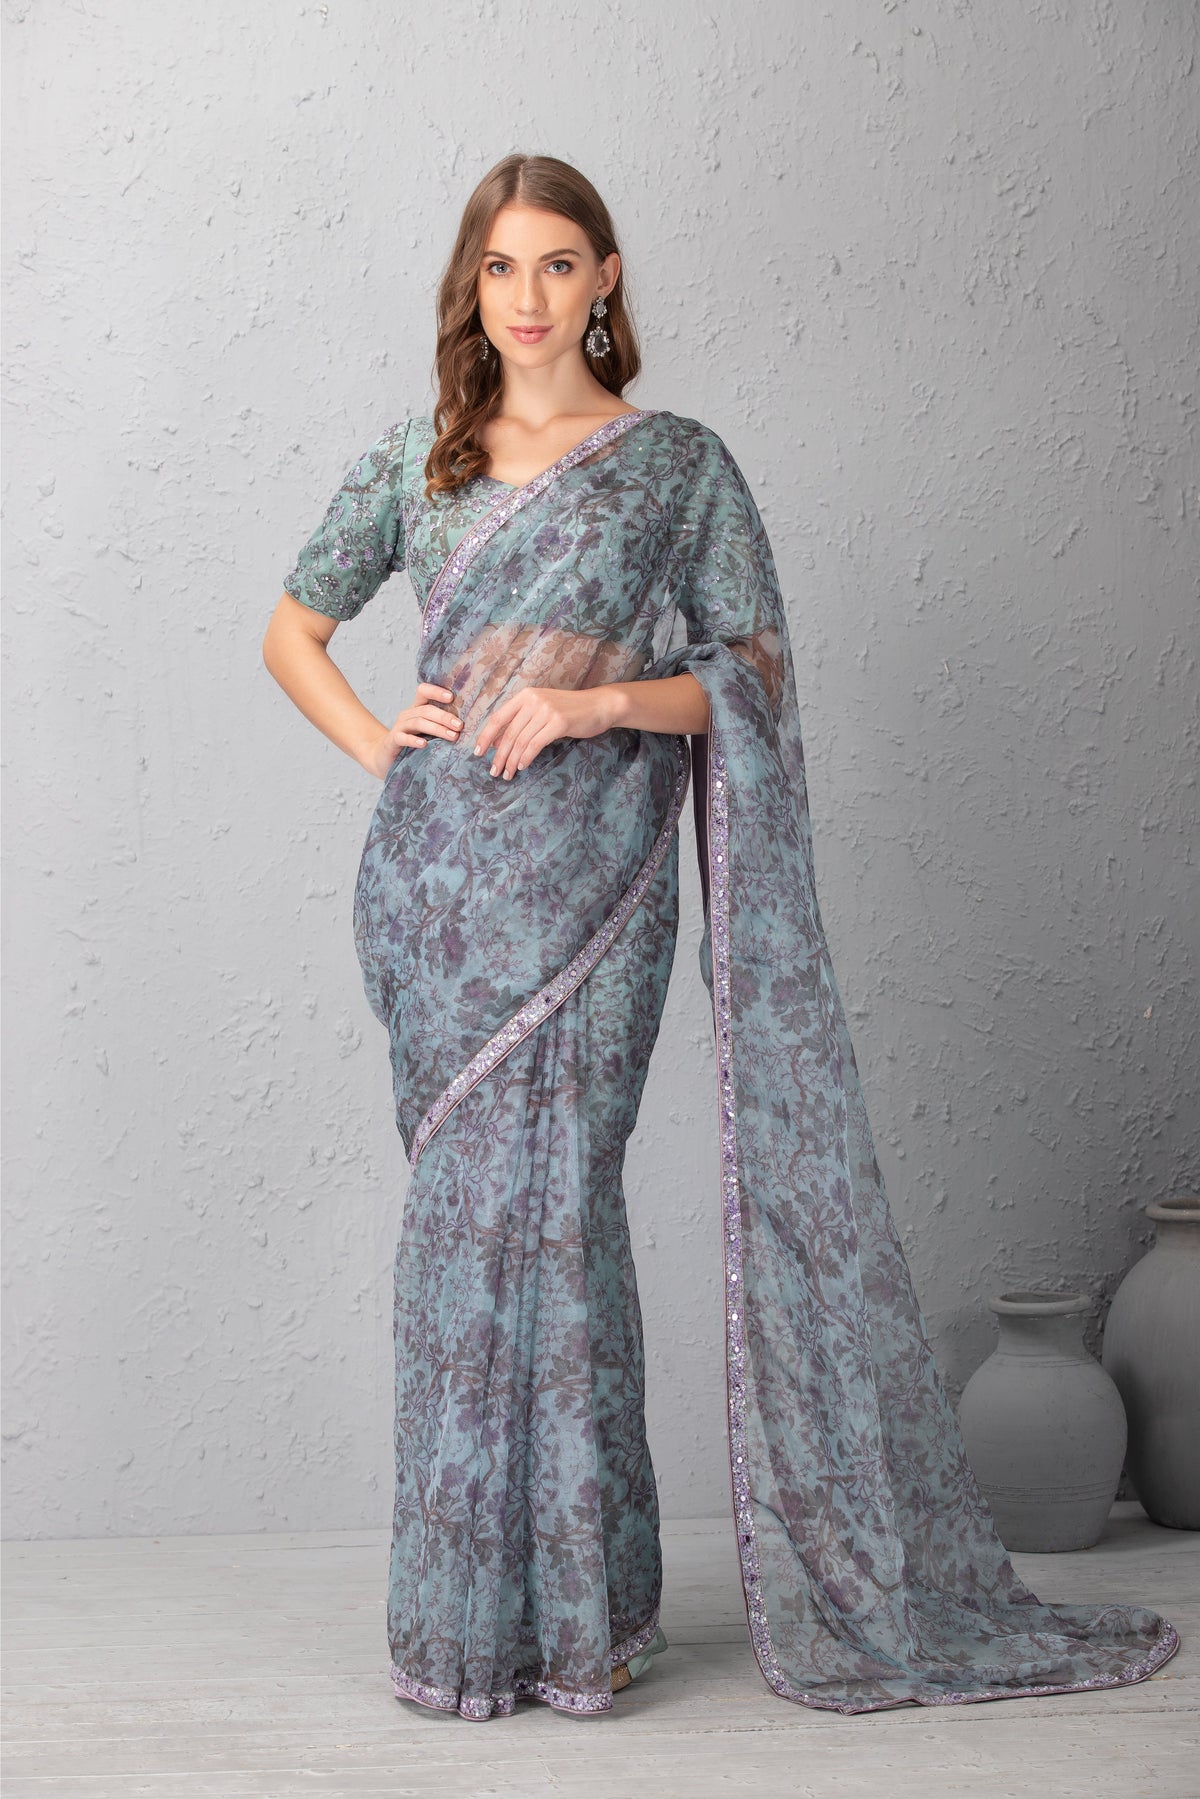 Mineral Blue Printed Floral Saree